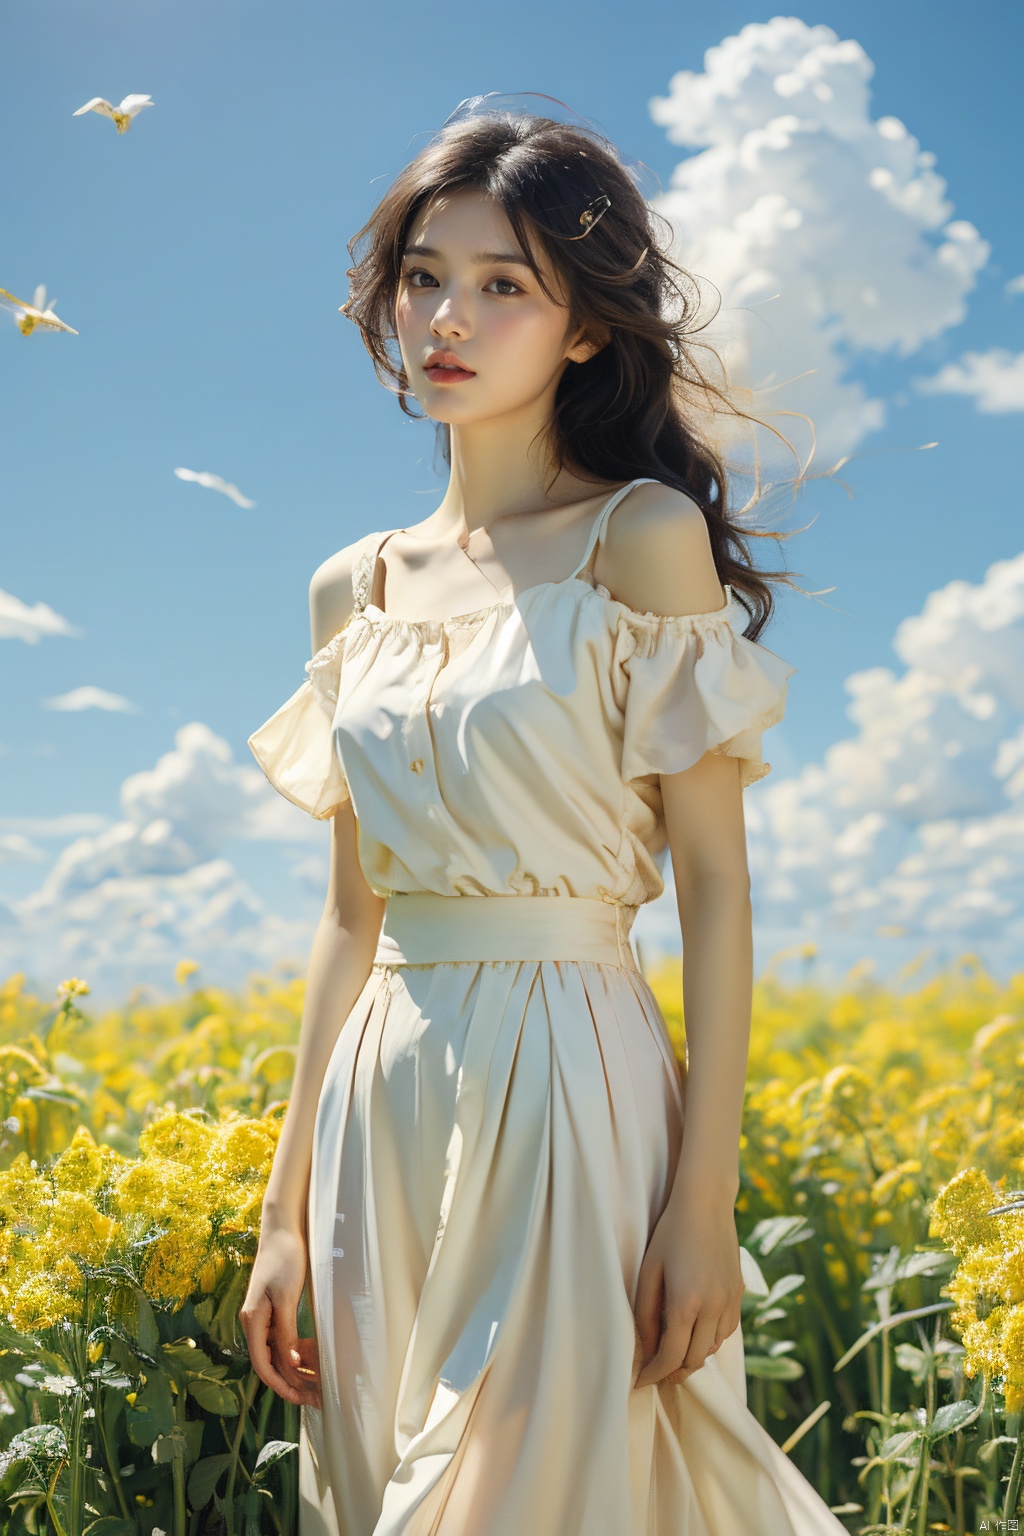  A elegant woman in a white suit with black short hair, standing in a field of blooming rapeseed flowers against a backdrop of red sky and white clouds, gentle breeze blowing, causing her clothes corner and hair to flutter slightly, high quality full HD picture, art painting by famous artist., Light master, ((poakl)), (\meng ze\), xiqing, (/qingning/), babata, mtianmei, (\MBTI\)